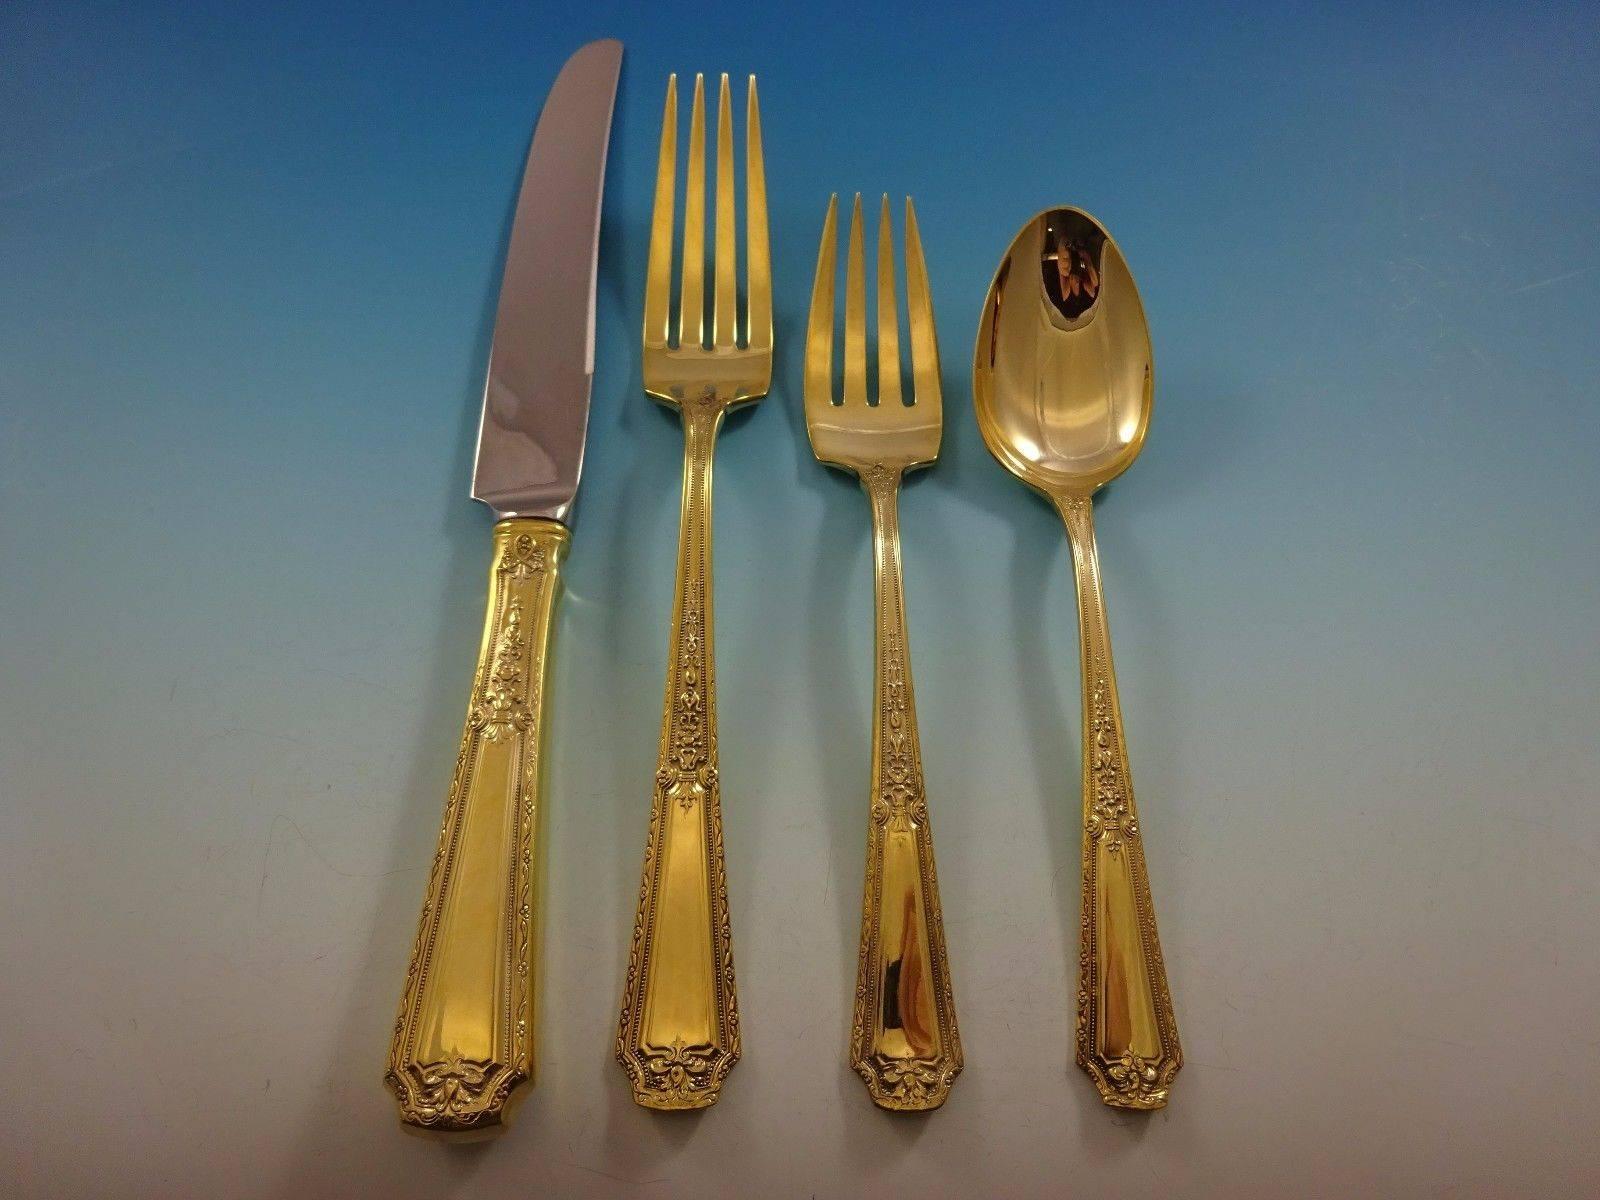 Louis XIV gold by Towle sterling silver flatware set - 24 pieces. This set is vermeil (completely gold-washed) and includes: 

Six knives, Old french blades, 8 5/8